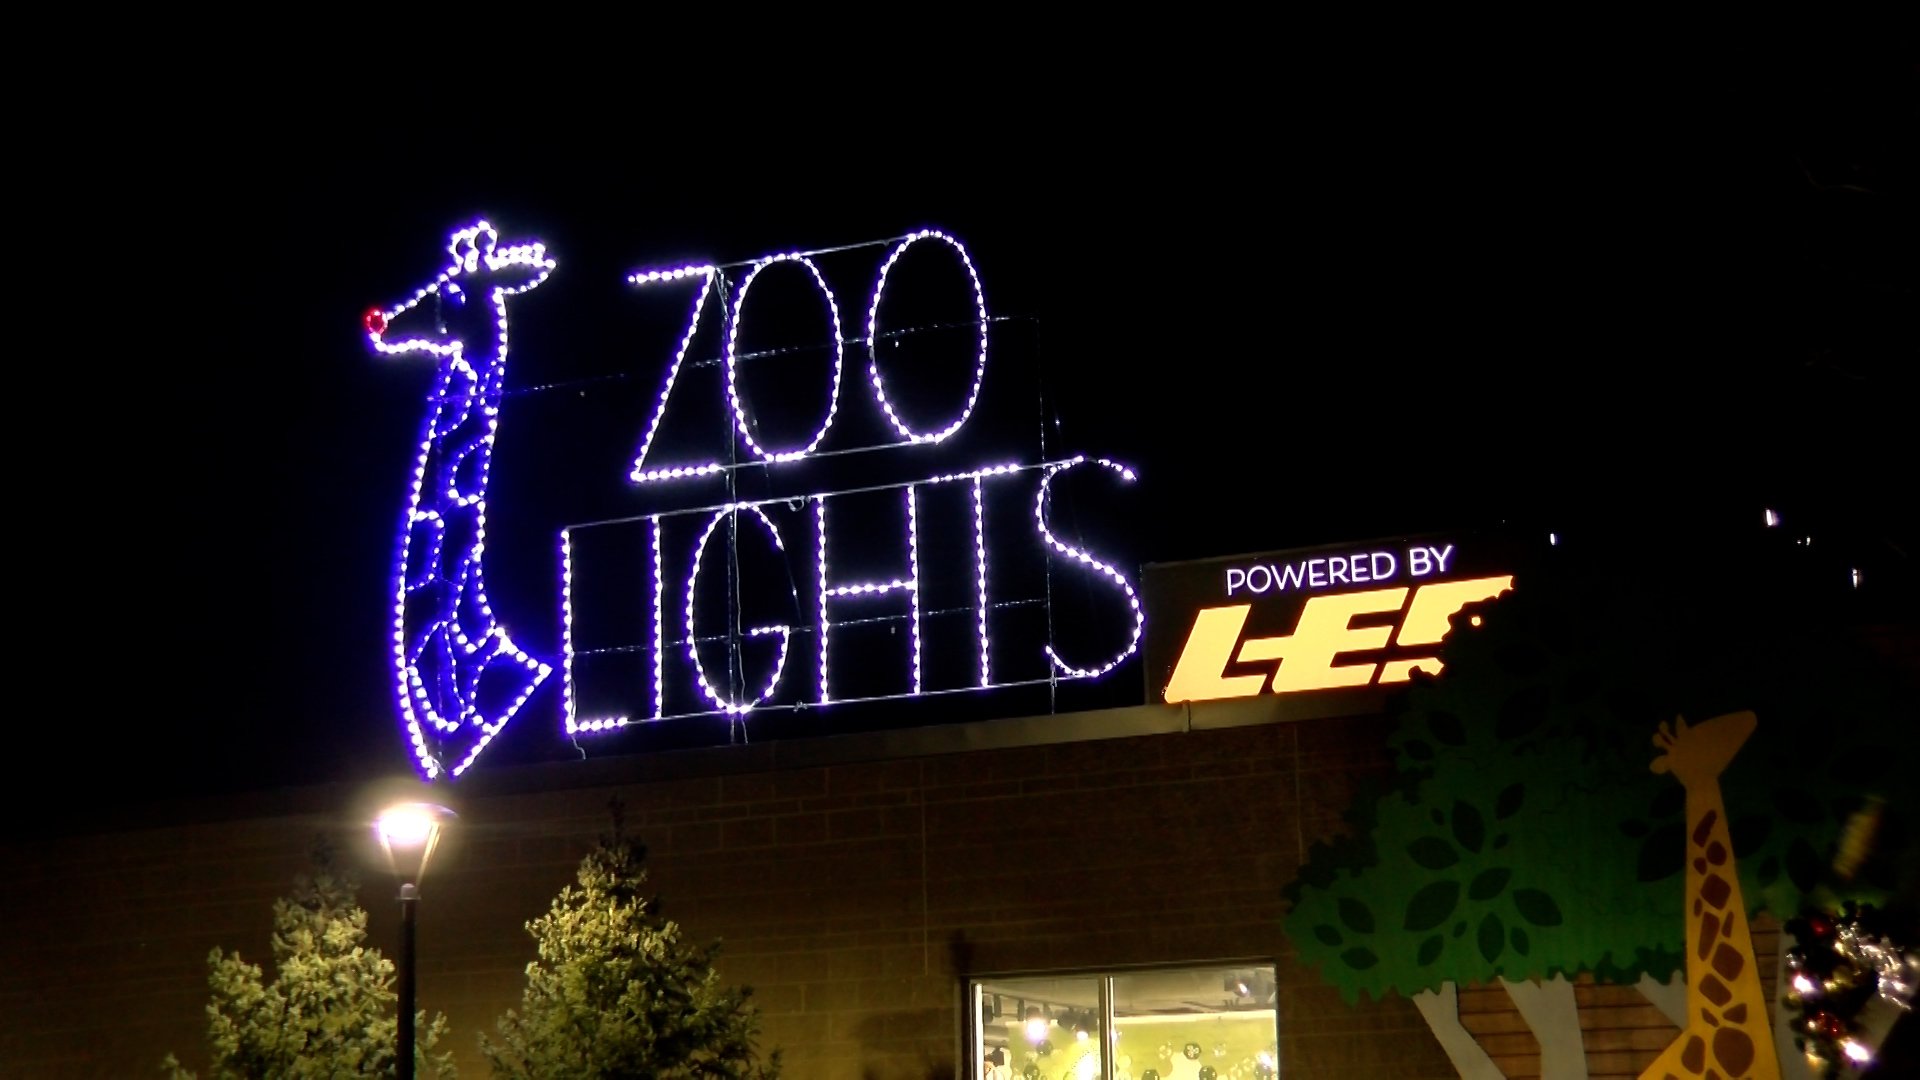 Zoo Lights returns to Lincoln Children's Zoo